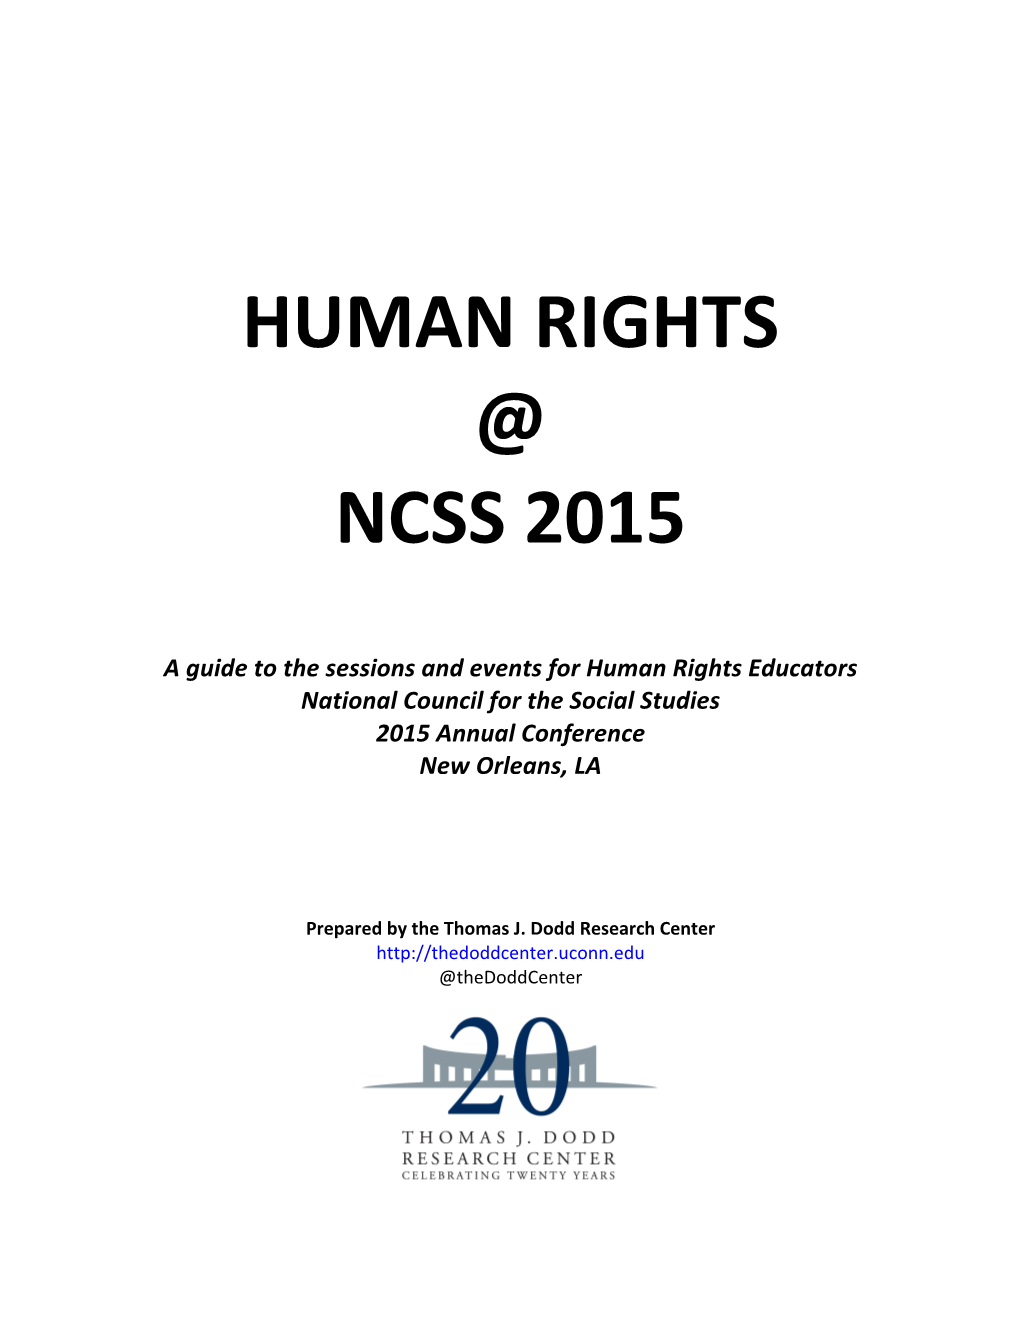 Human Rights @ Ncss 2015